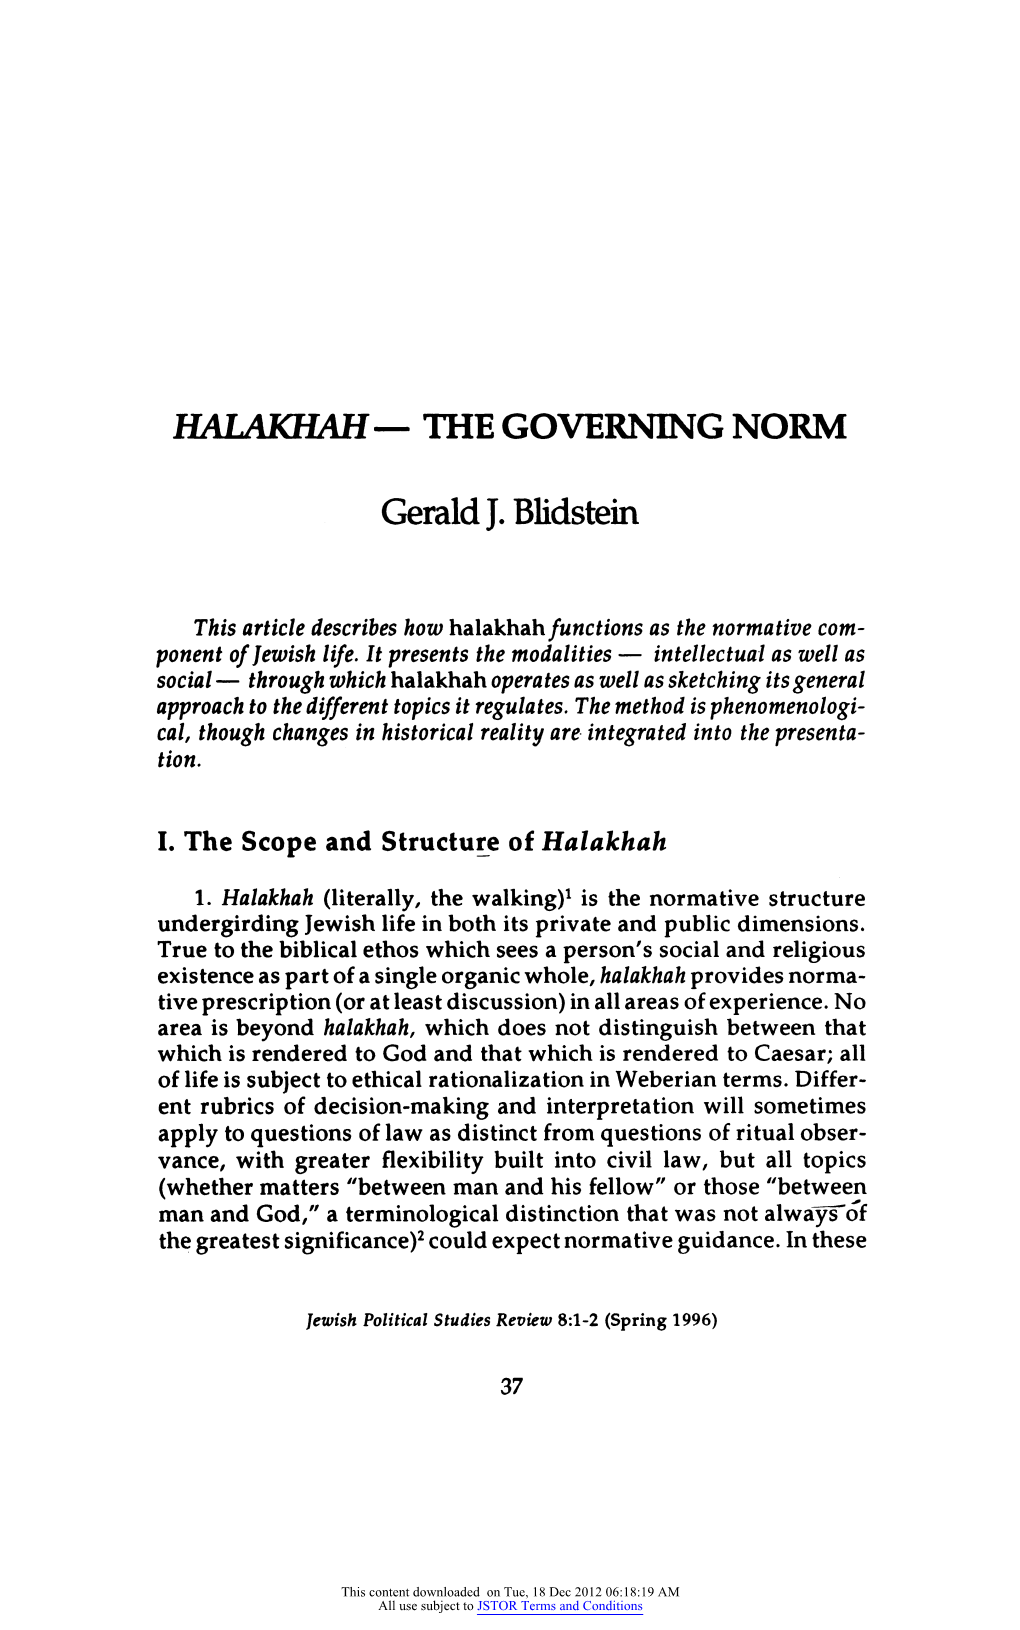 Halakhah? the Governing Norm